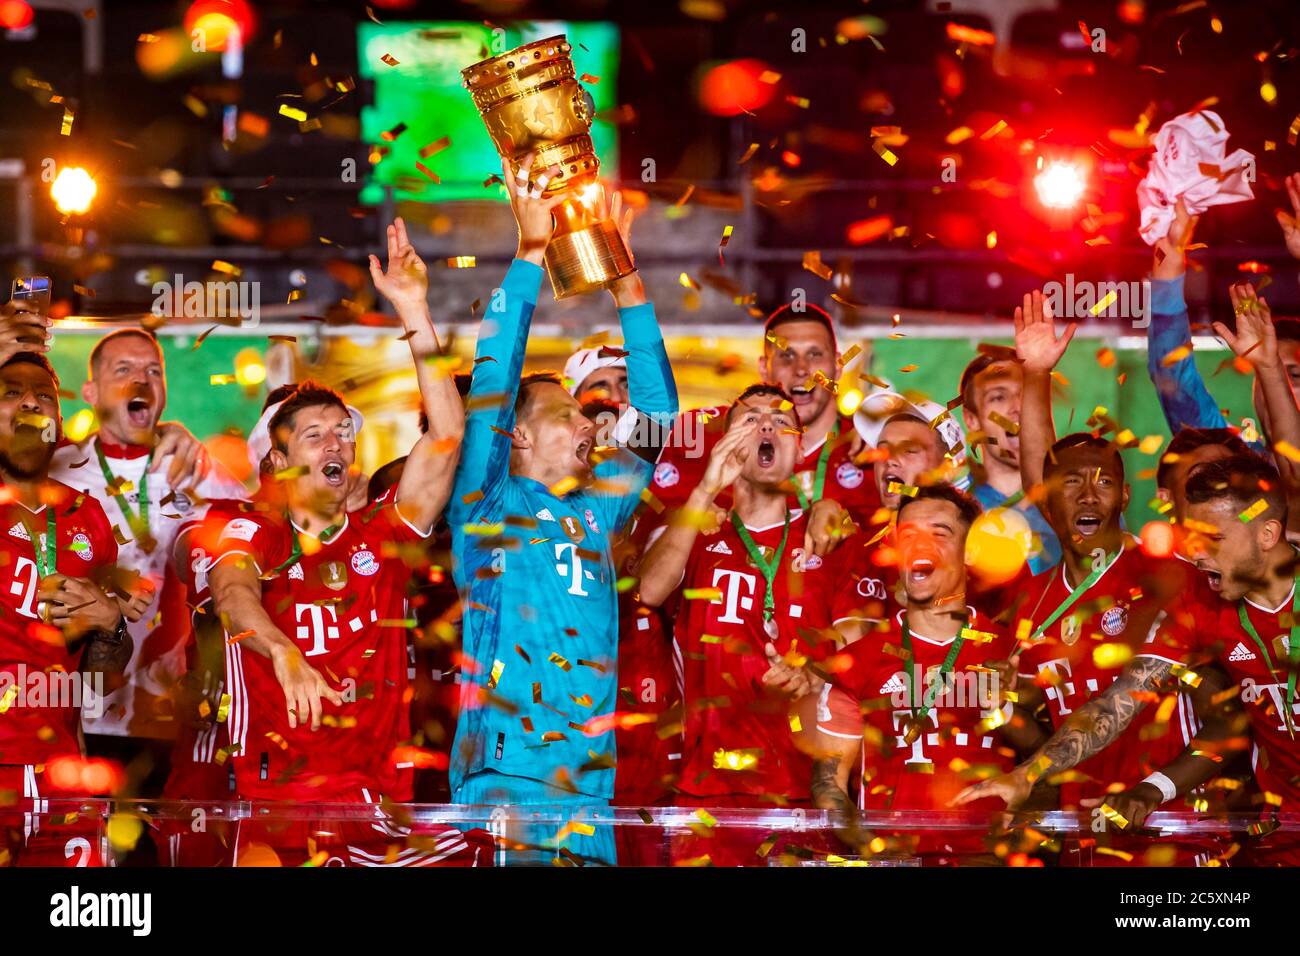 04.07.2020, xkvx, Fussball DFB Pokal Finale, Bayer 04 Leverkusen - FC Bayern Muenchen emspor, v.l. Bayern Spieler jubeln / jubelt nach Spielende / celebrate at the end of the match mit dem Pokal Manuel Neuer (FC Bayern Muenchen)  Foto: Kevin Voigt/Jan Huebner/Pool  (DFL/DFB REGULATIONS PROHIBIT ANY USE OF PHOTOGRAPHS as IMAGE SEQUENCES and/or QUASI-VIDEO - Editorial Use ONLY, National and International News Agencies OUT) Stock Photo